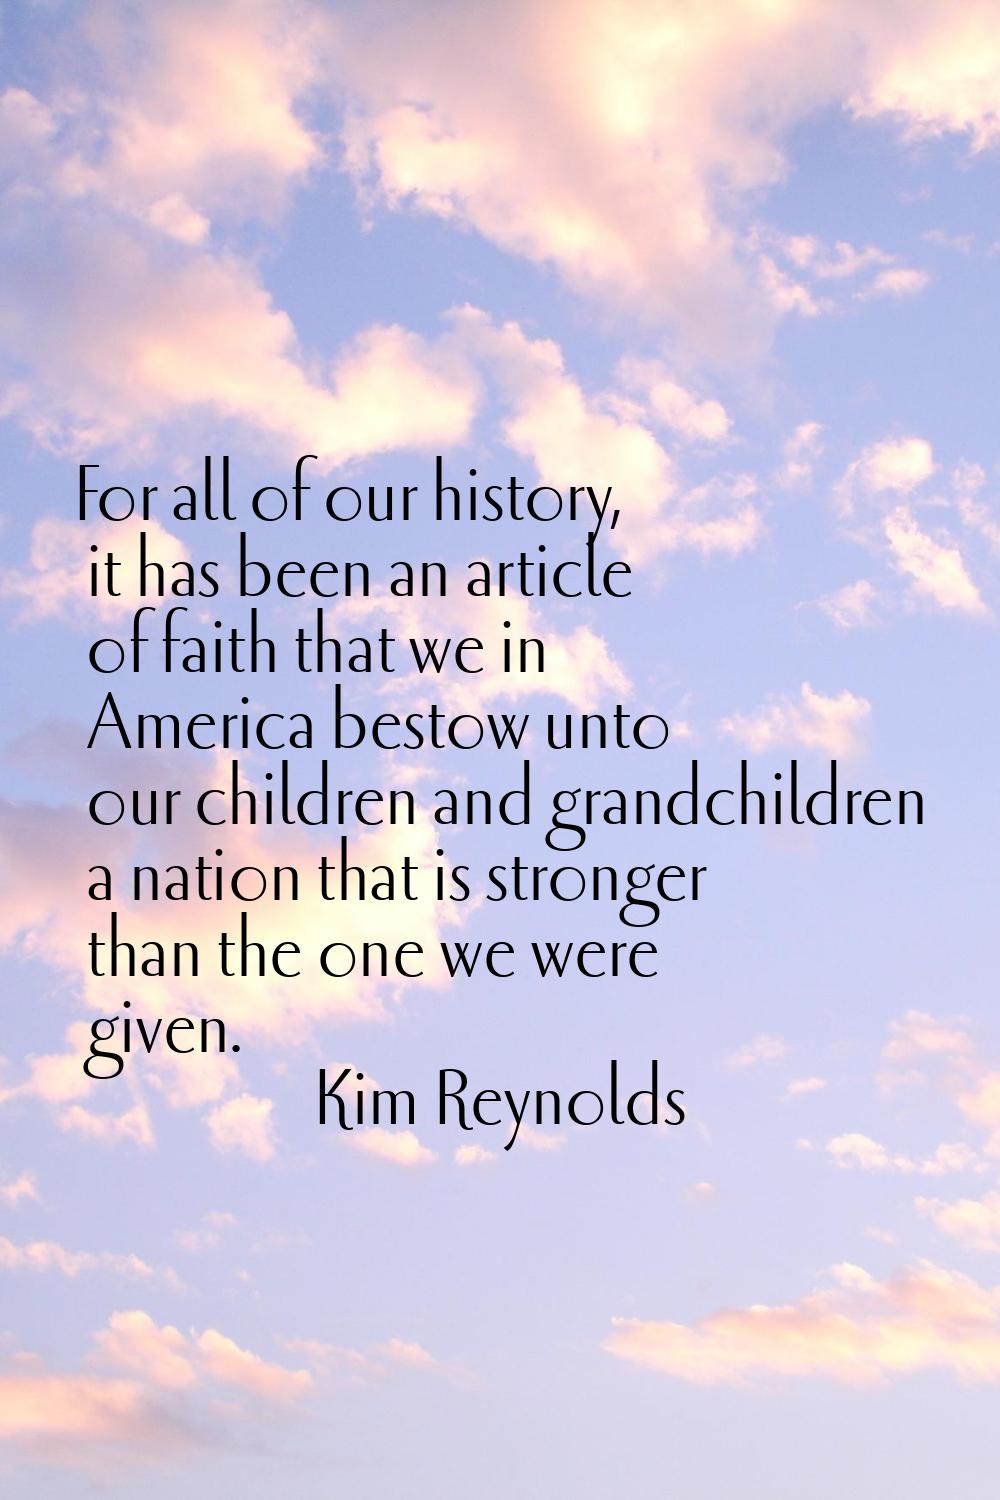 For all of our history, it has been an article of faith that we in America bestow unto our children